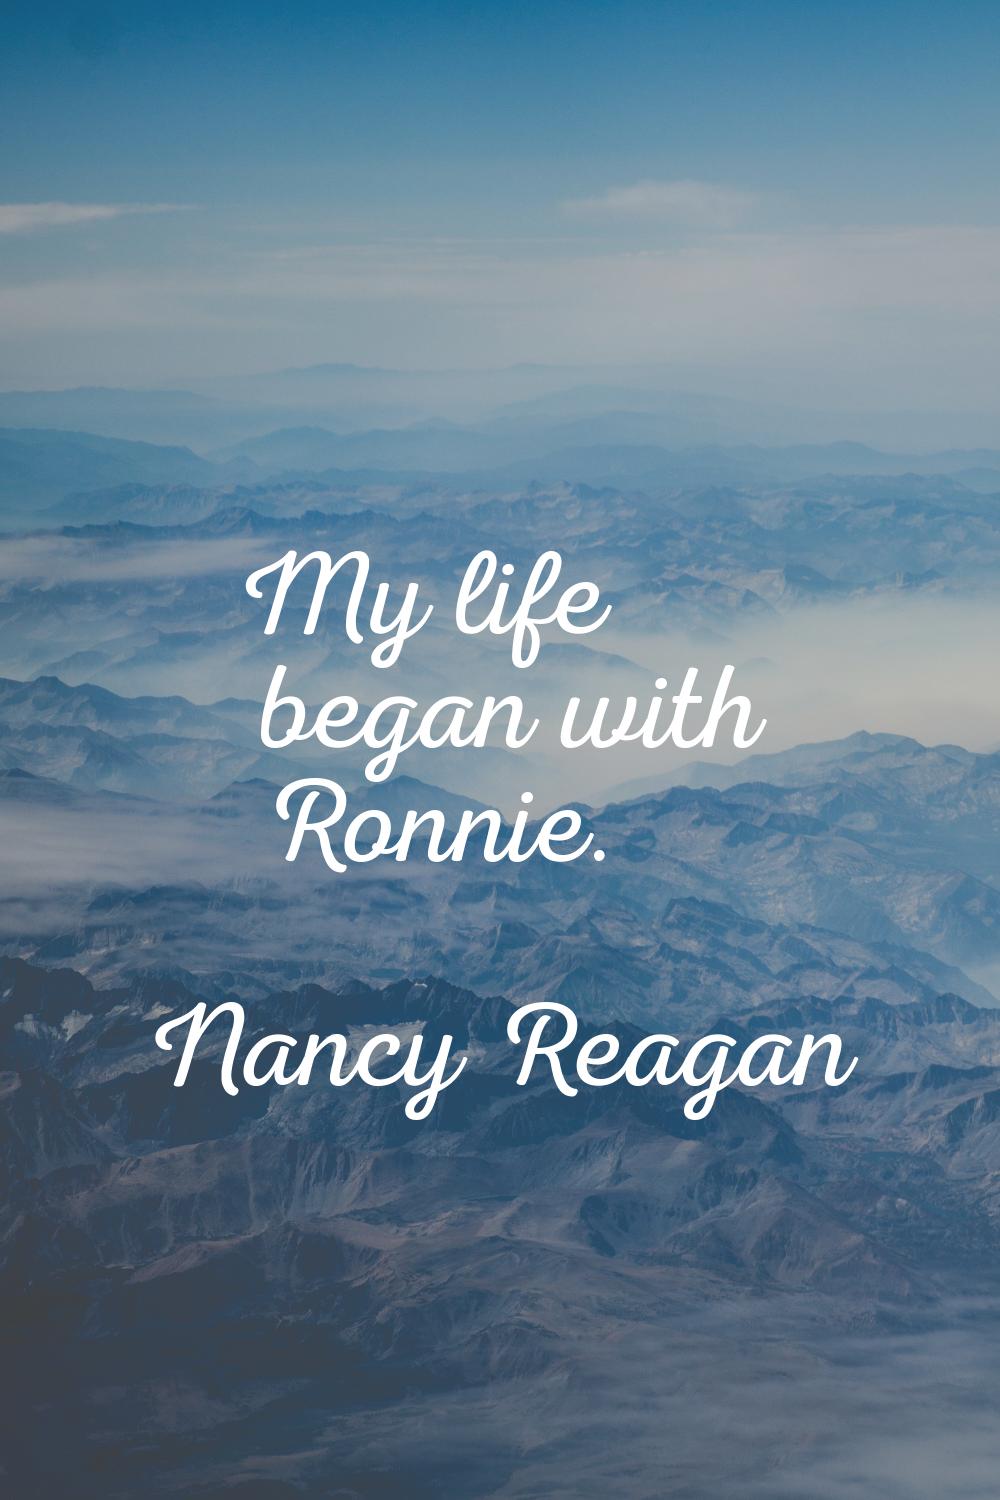 My life began with Ronnie.